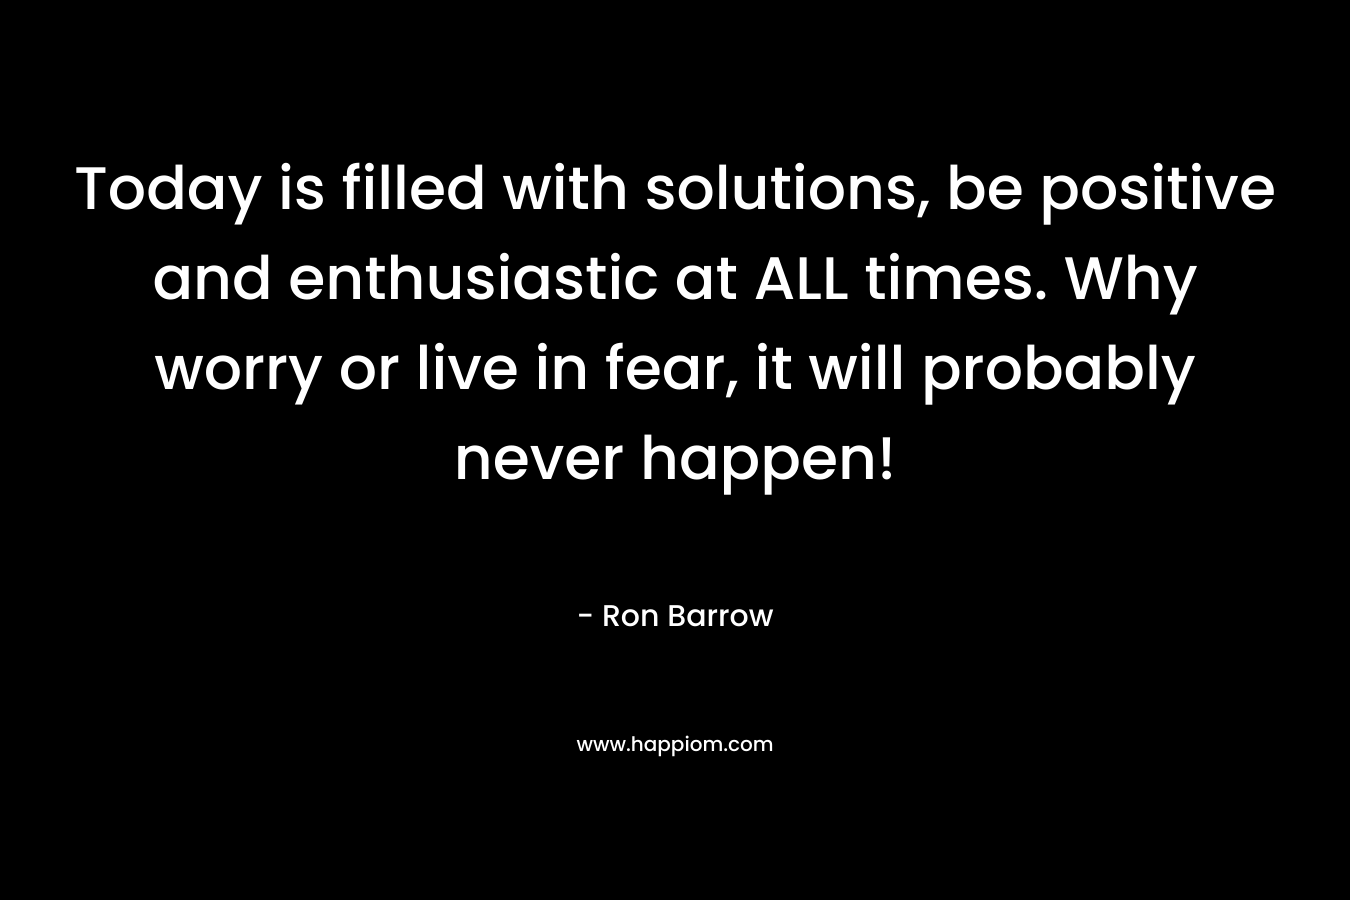 Today is filled with solutions, be positive and enthusiastic at ALL times. Why worry or live in fear, it will probably never happen!